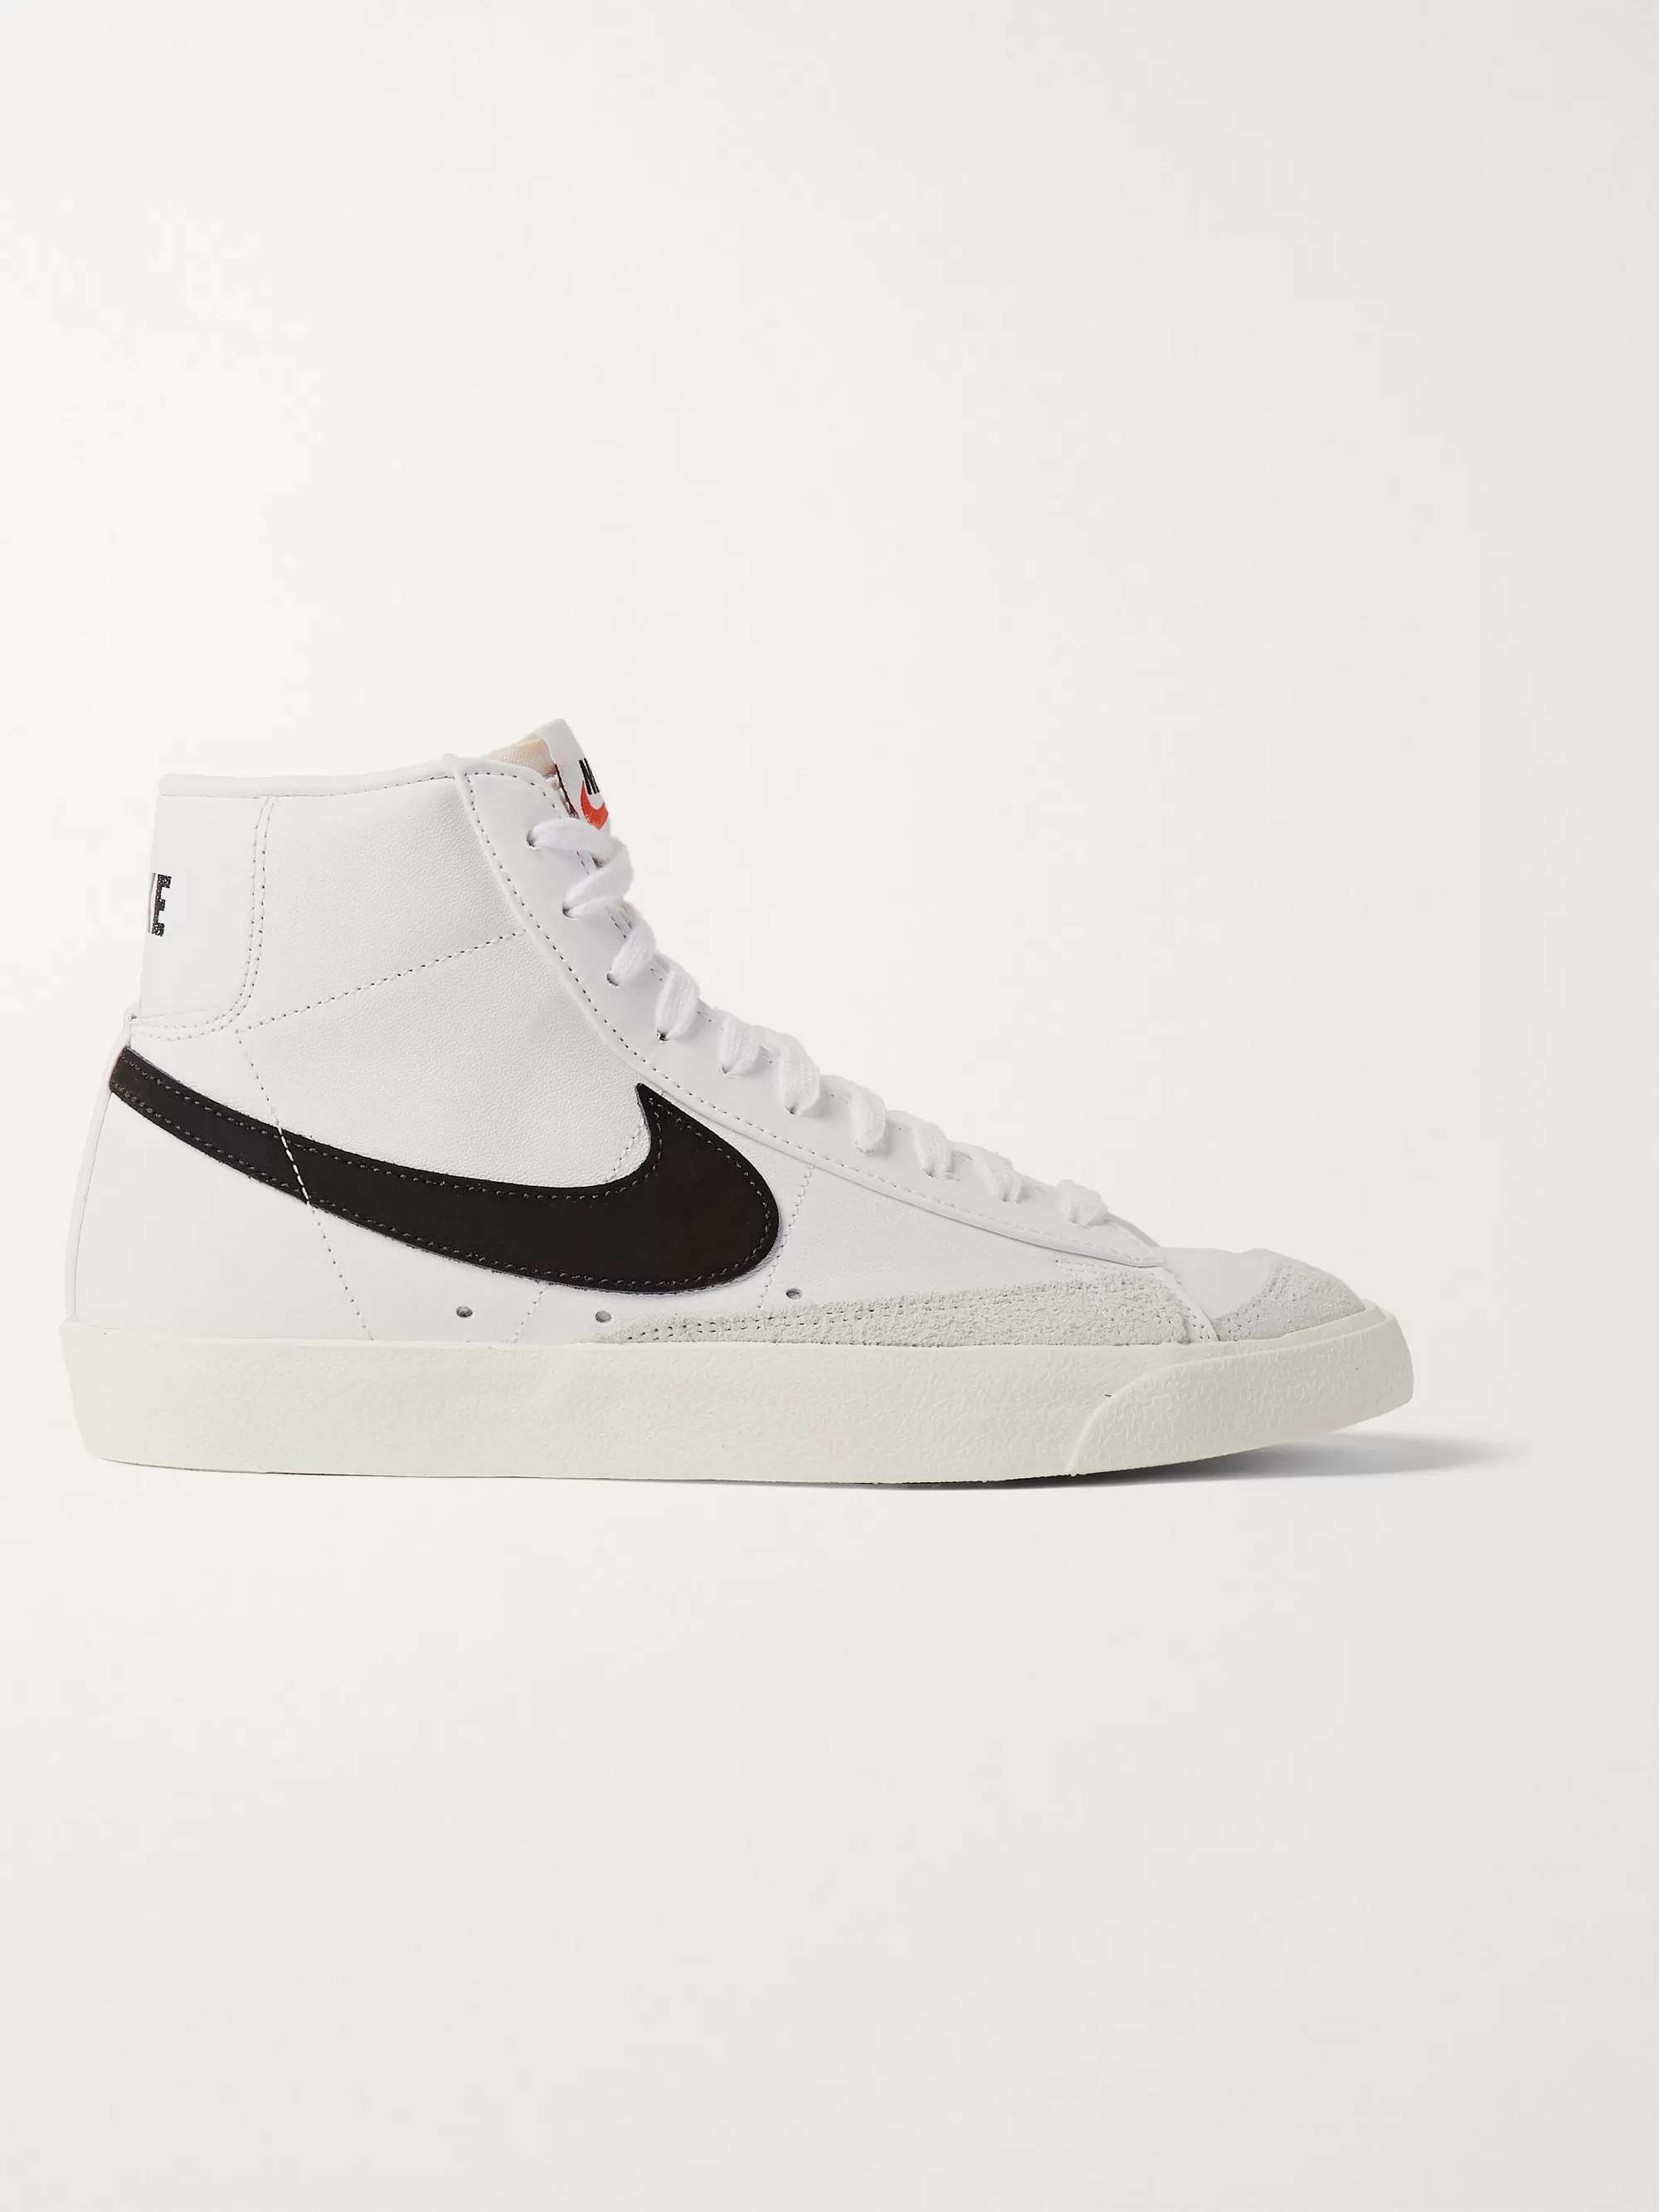 NIKE Blazer Mid '77 Suede-Trimmed Leather Sneakers | MR PORTER